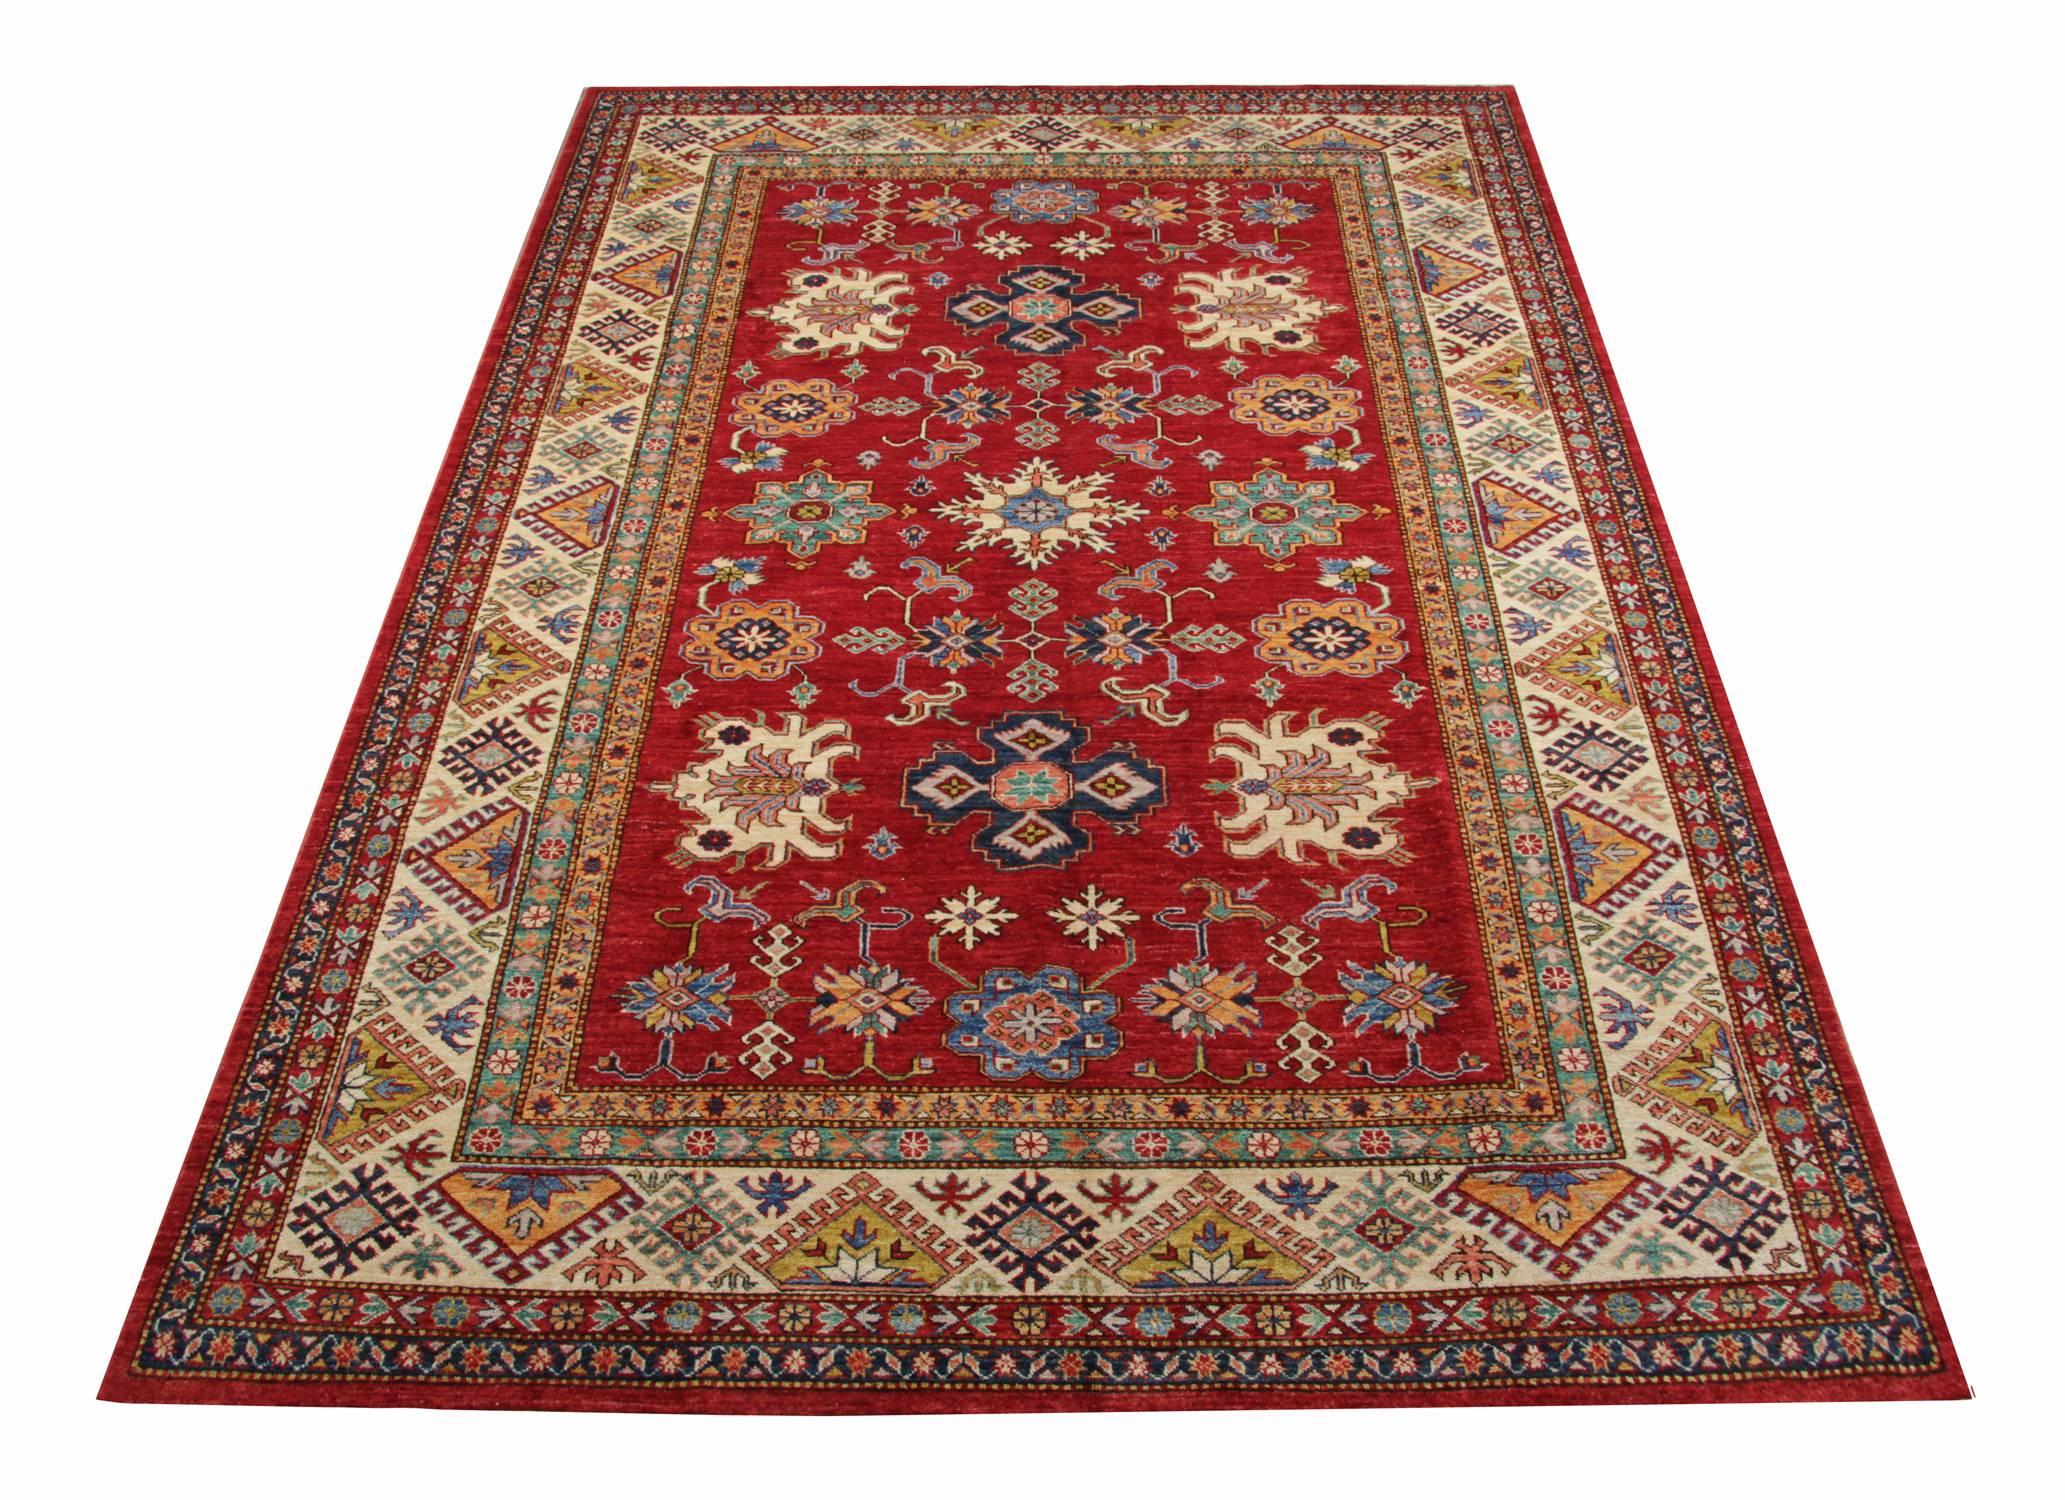 Handmade carpet Kazak rugs are patterned oriental rugs and primarily produced as village productions rather than city pieces. This red rug made from organic materials particular to individual tribal provinces and the rugs of the Caucasus normally